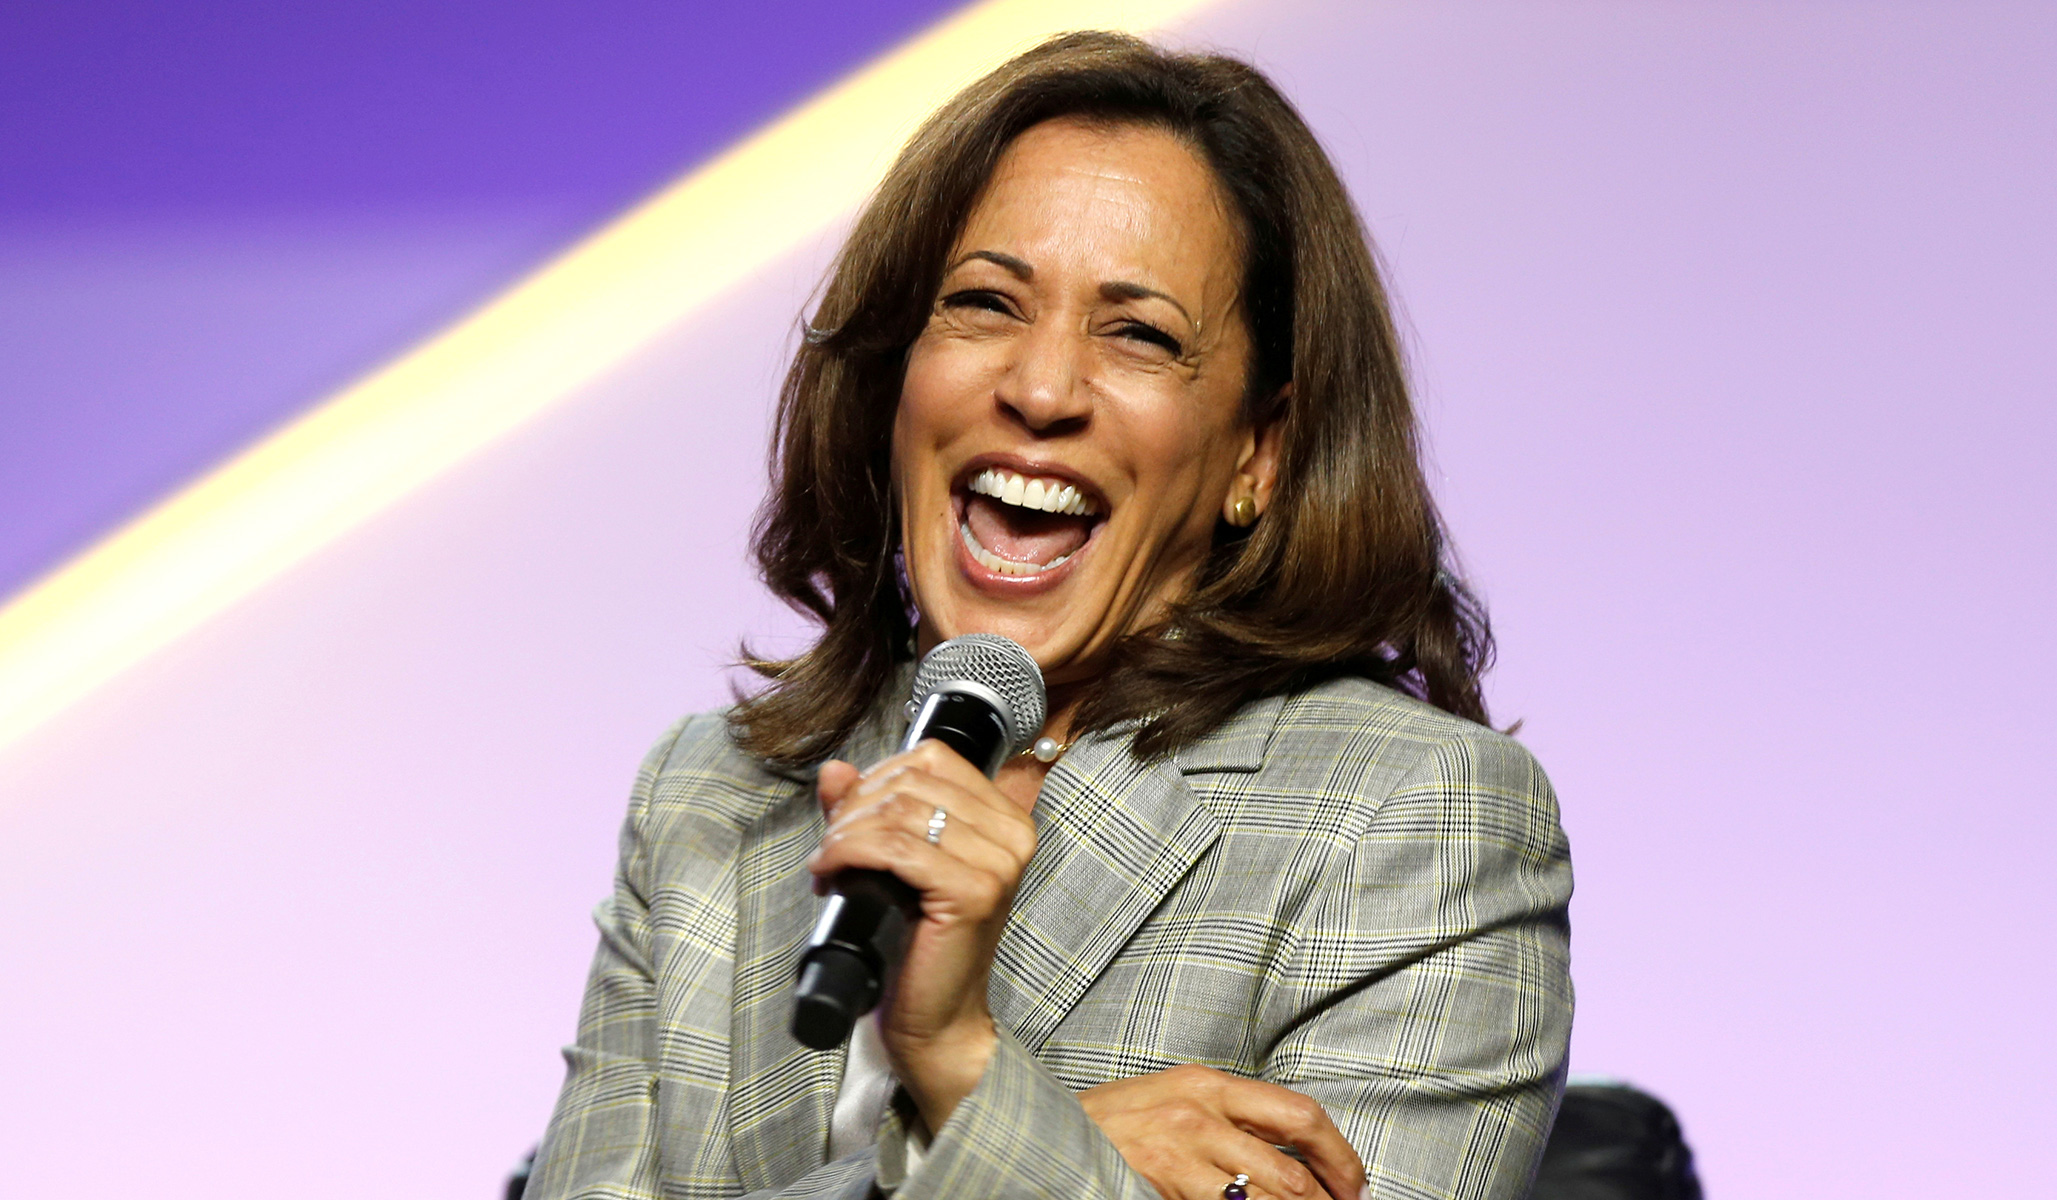 Harris’s New Comms Aide Under Fire for Old Tweet about Illegal Immigrants